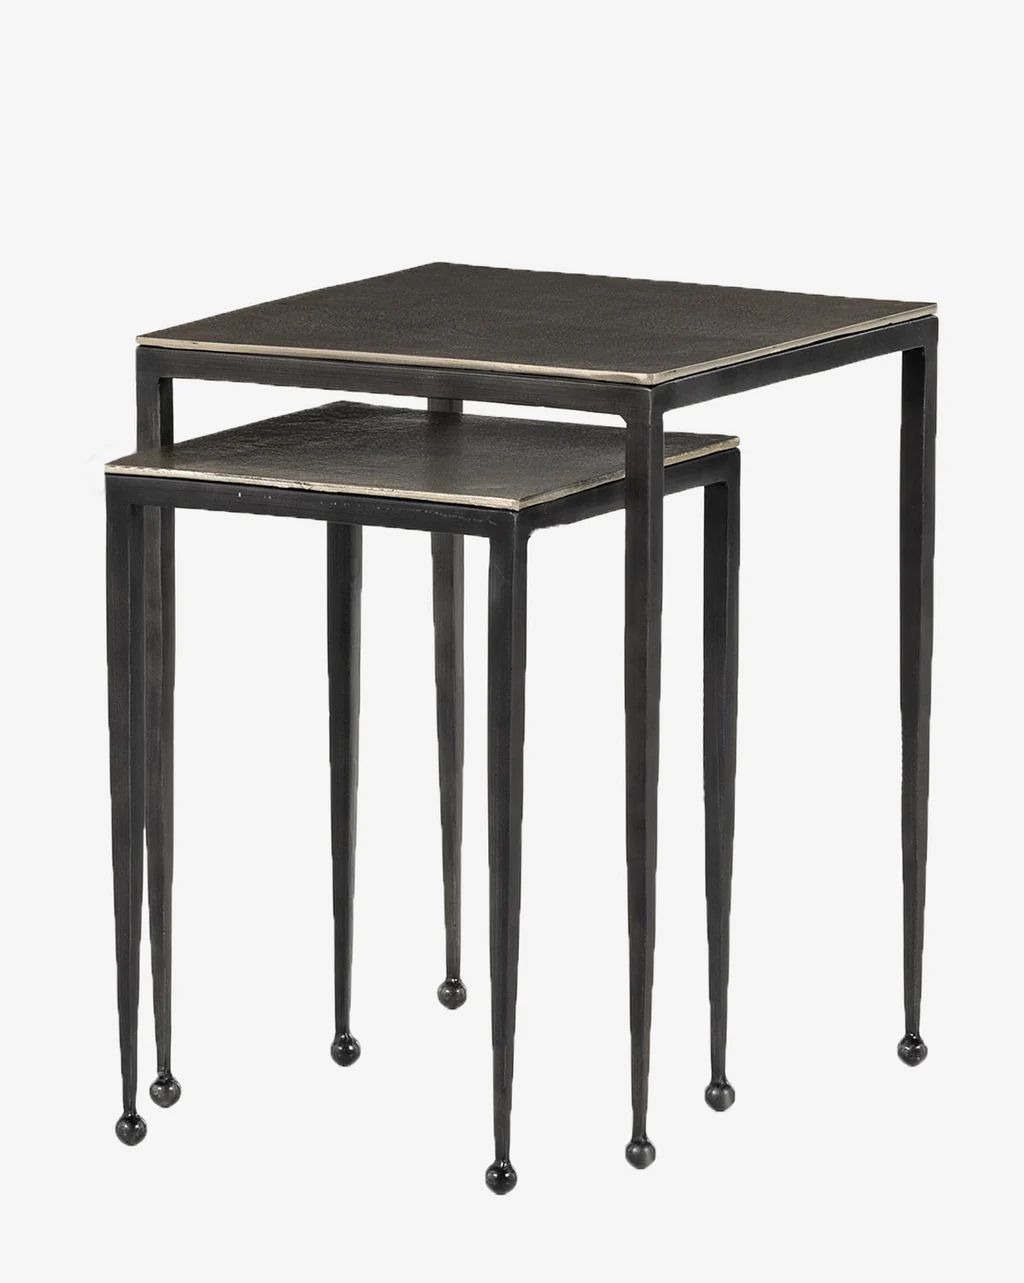 Biddy Nesting End Tables | McGee & Co.